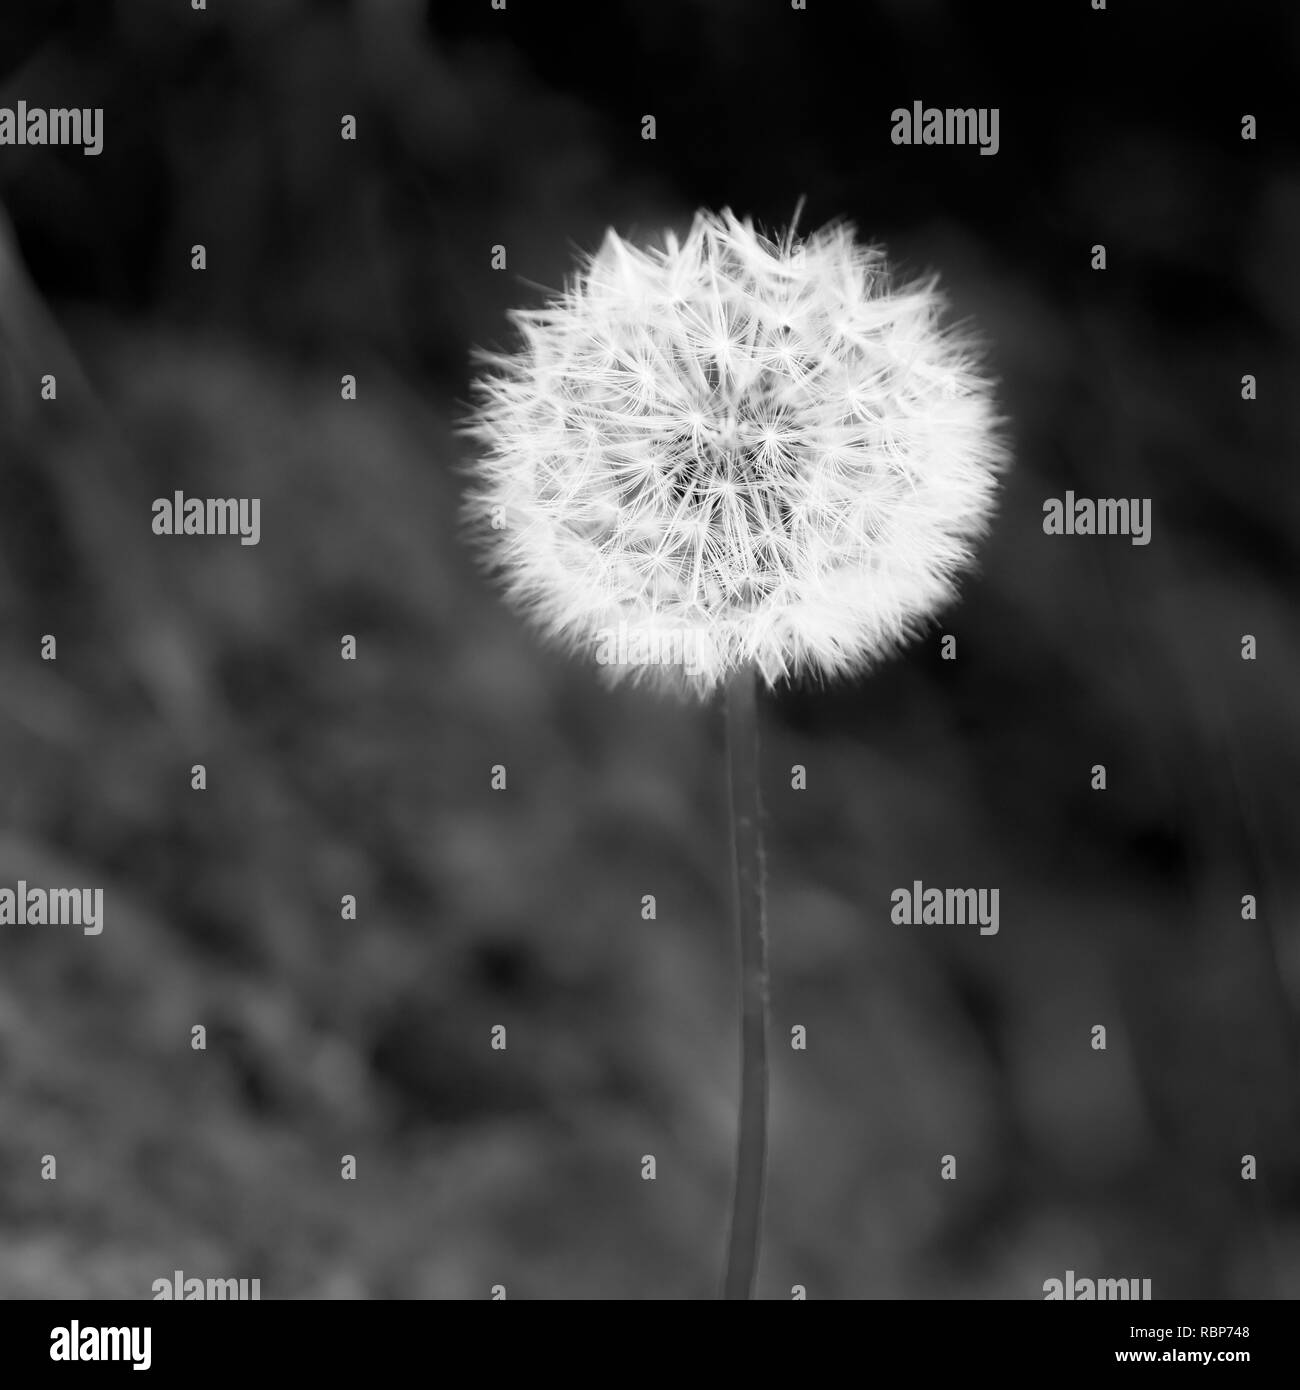 Dandelion seed head in black and white Stock Photo